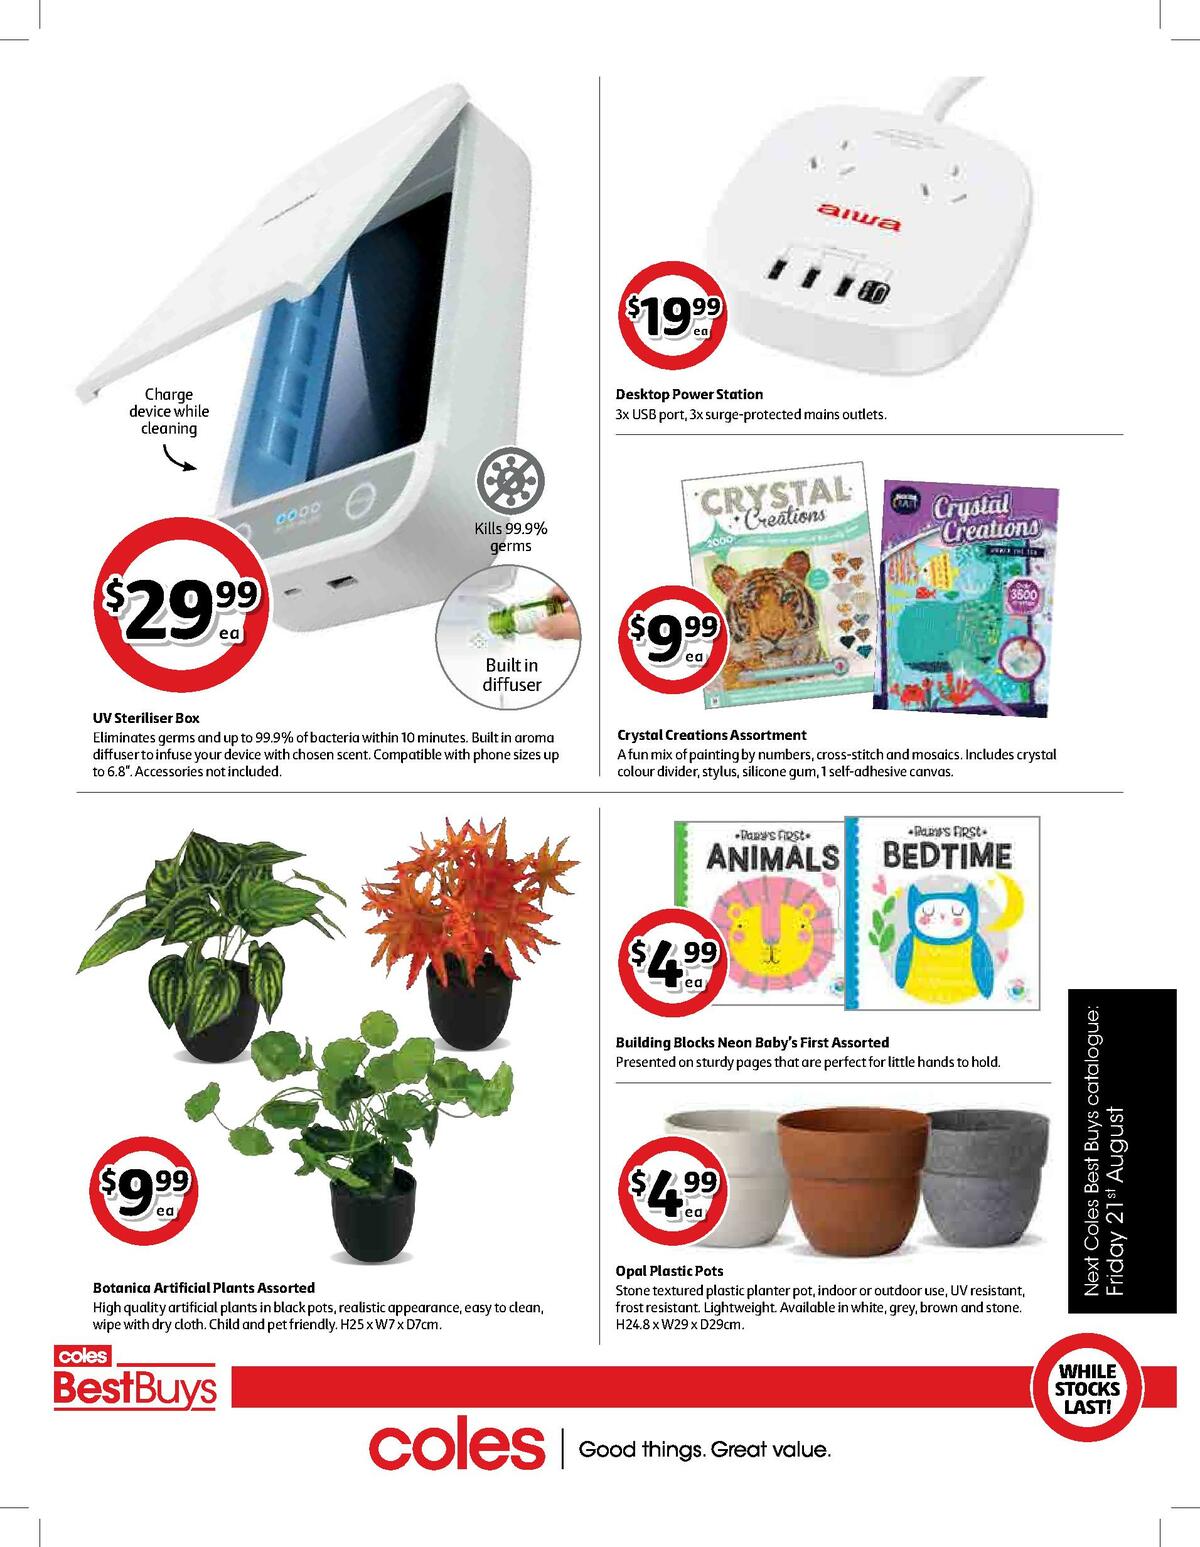 Coles Best Buys Catalogues from 7 August